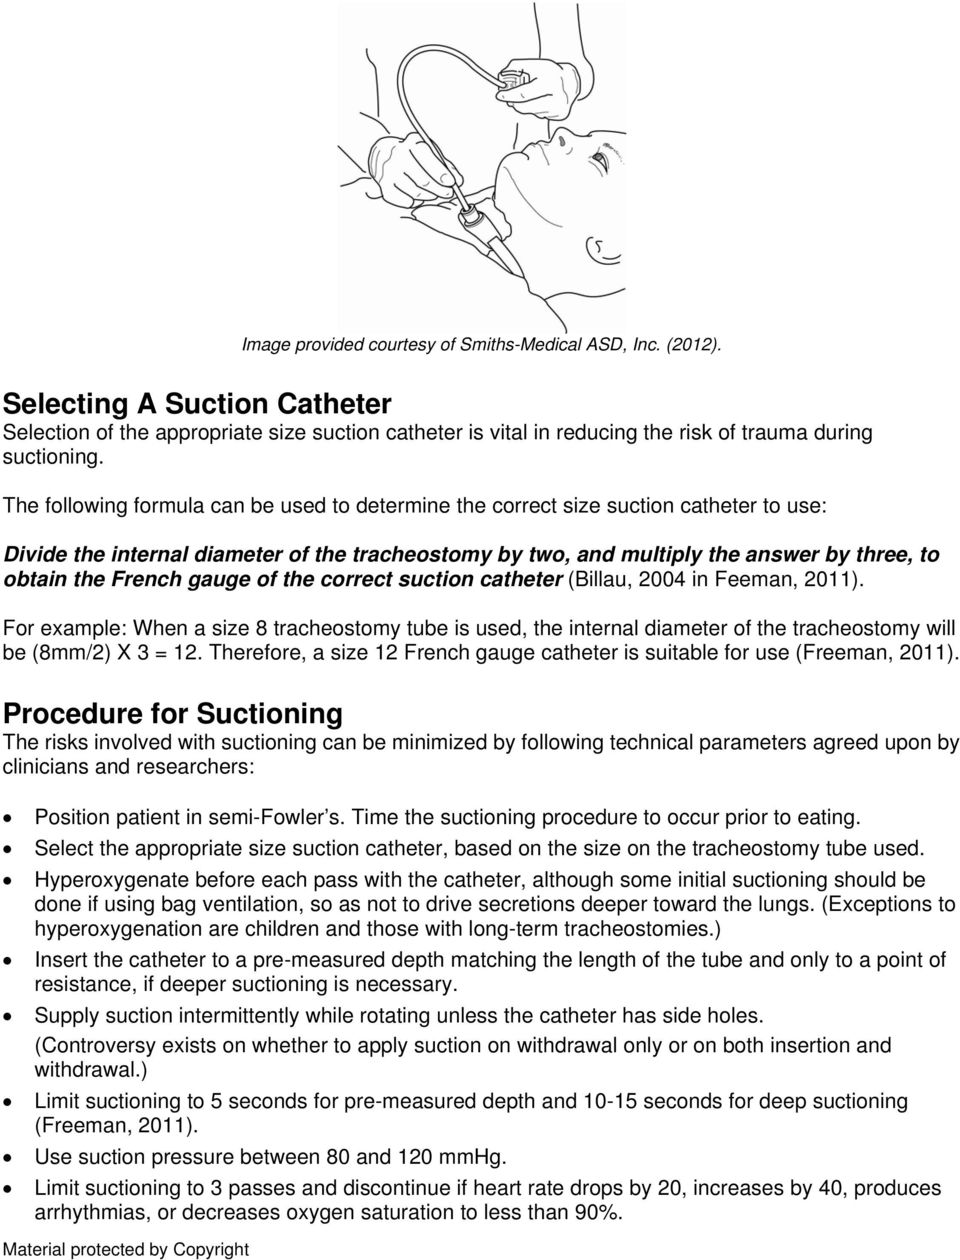 French gauge of the correct suction catheter (Billau, 2004 in Feeman, 2011). For example: When a size 8 tracheostomy tube is used, the internal diameter of the tracheostomy will be (8mm/2) X 3 = 12.